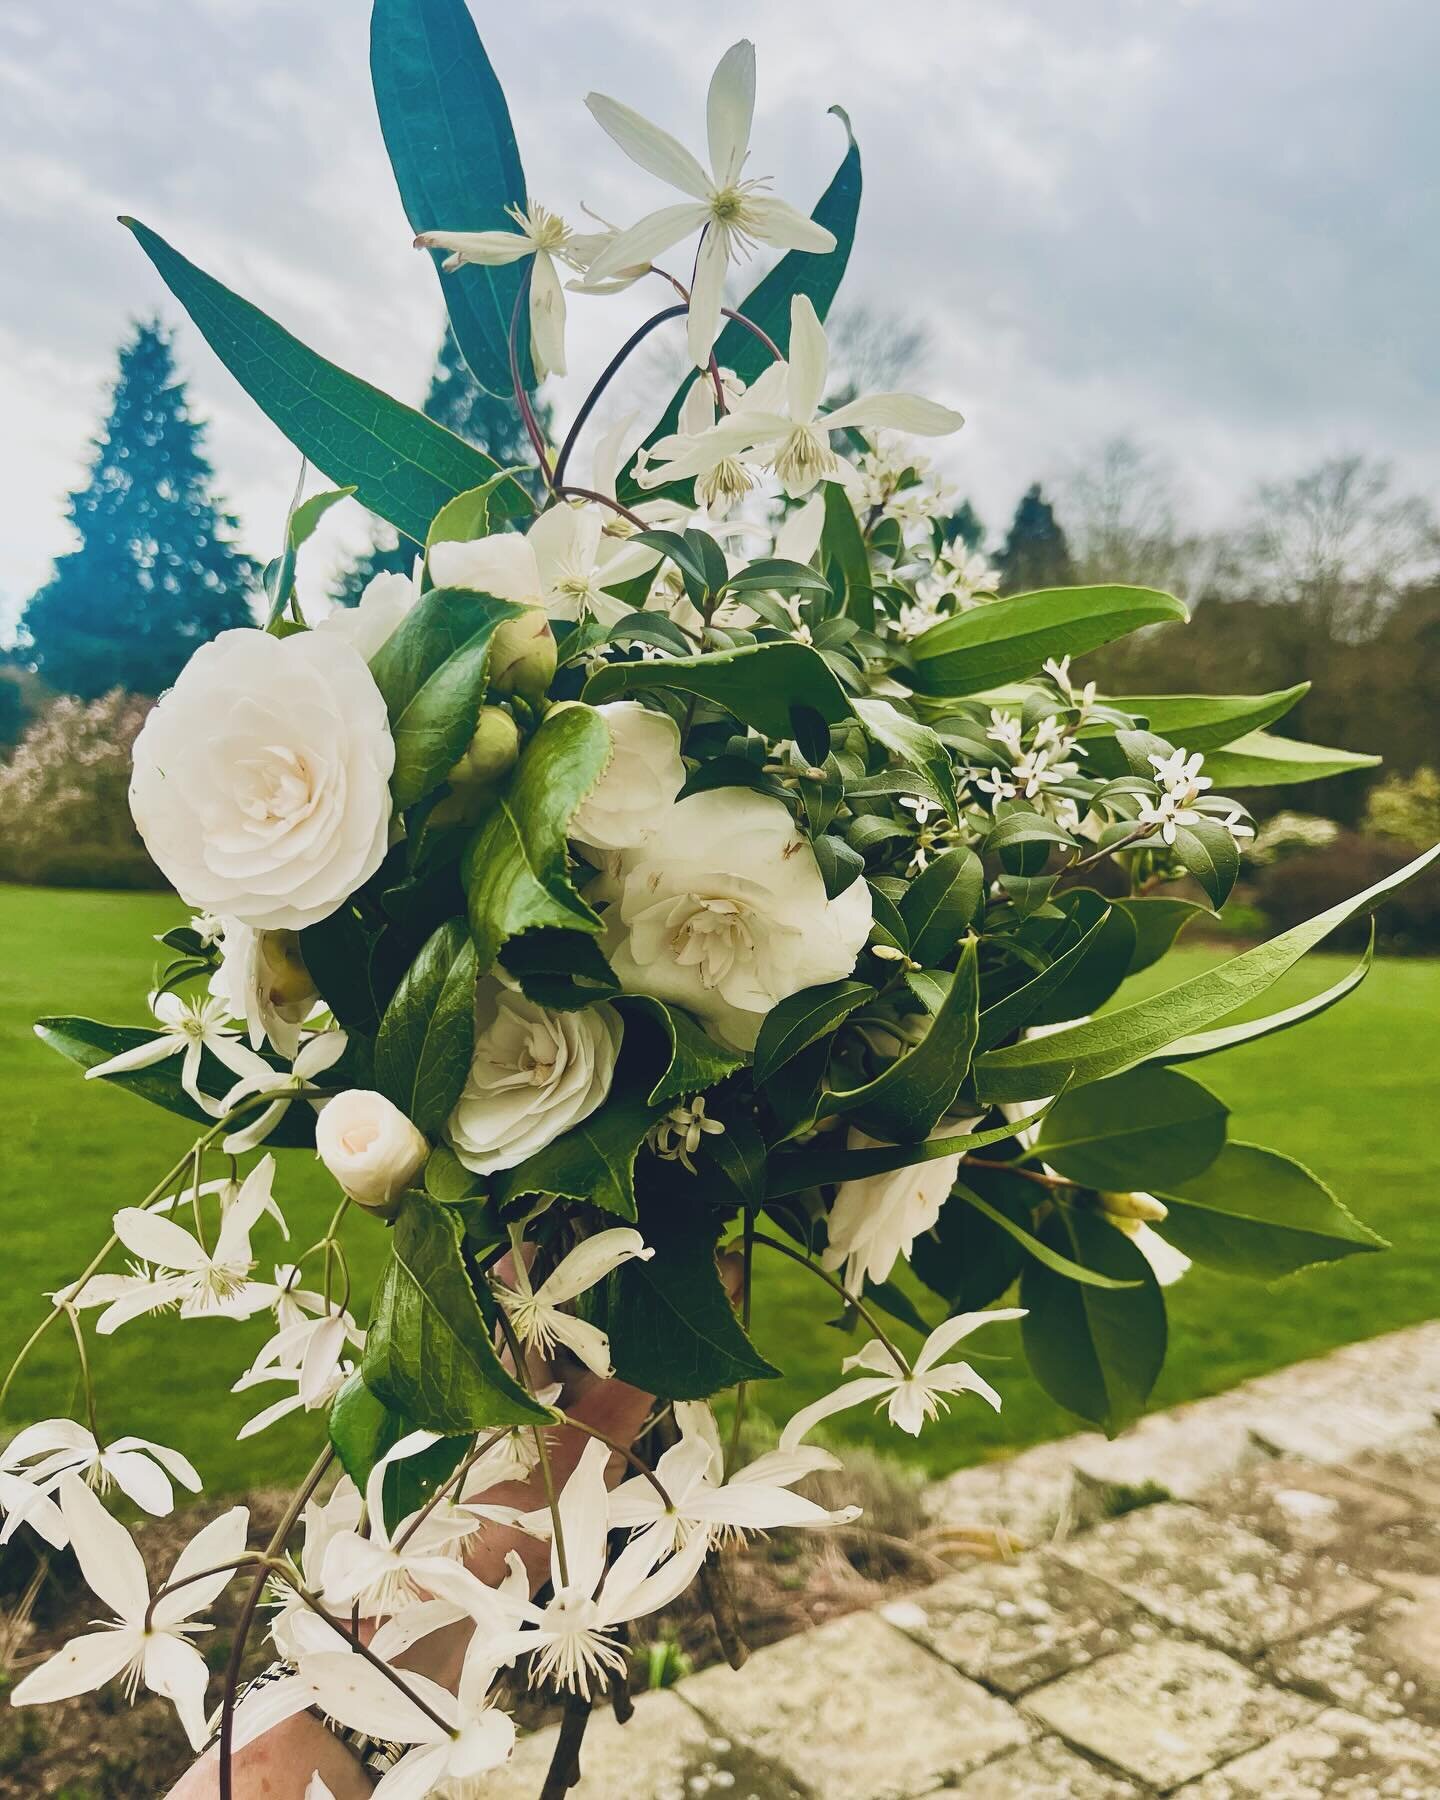 V pleased with this delicious smelling and flower-filled bouquet - not a bad haul for a March garden! We have highly scented #clematisarmandii, #osmanthusburkwoodii and the beautiful white #camellia that we can&rsquo;t stop picking. Rather bridal in 